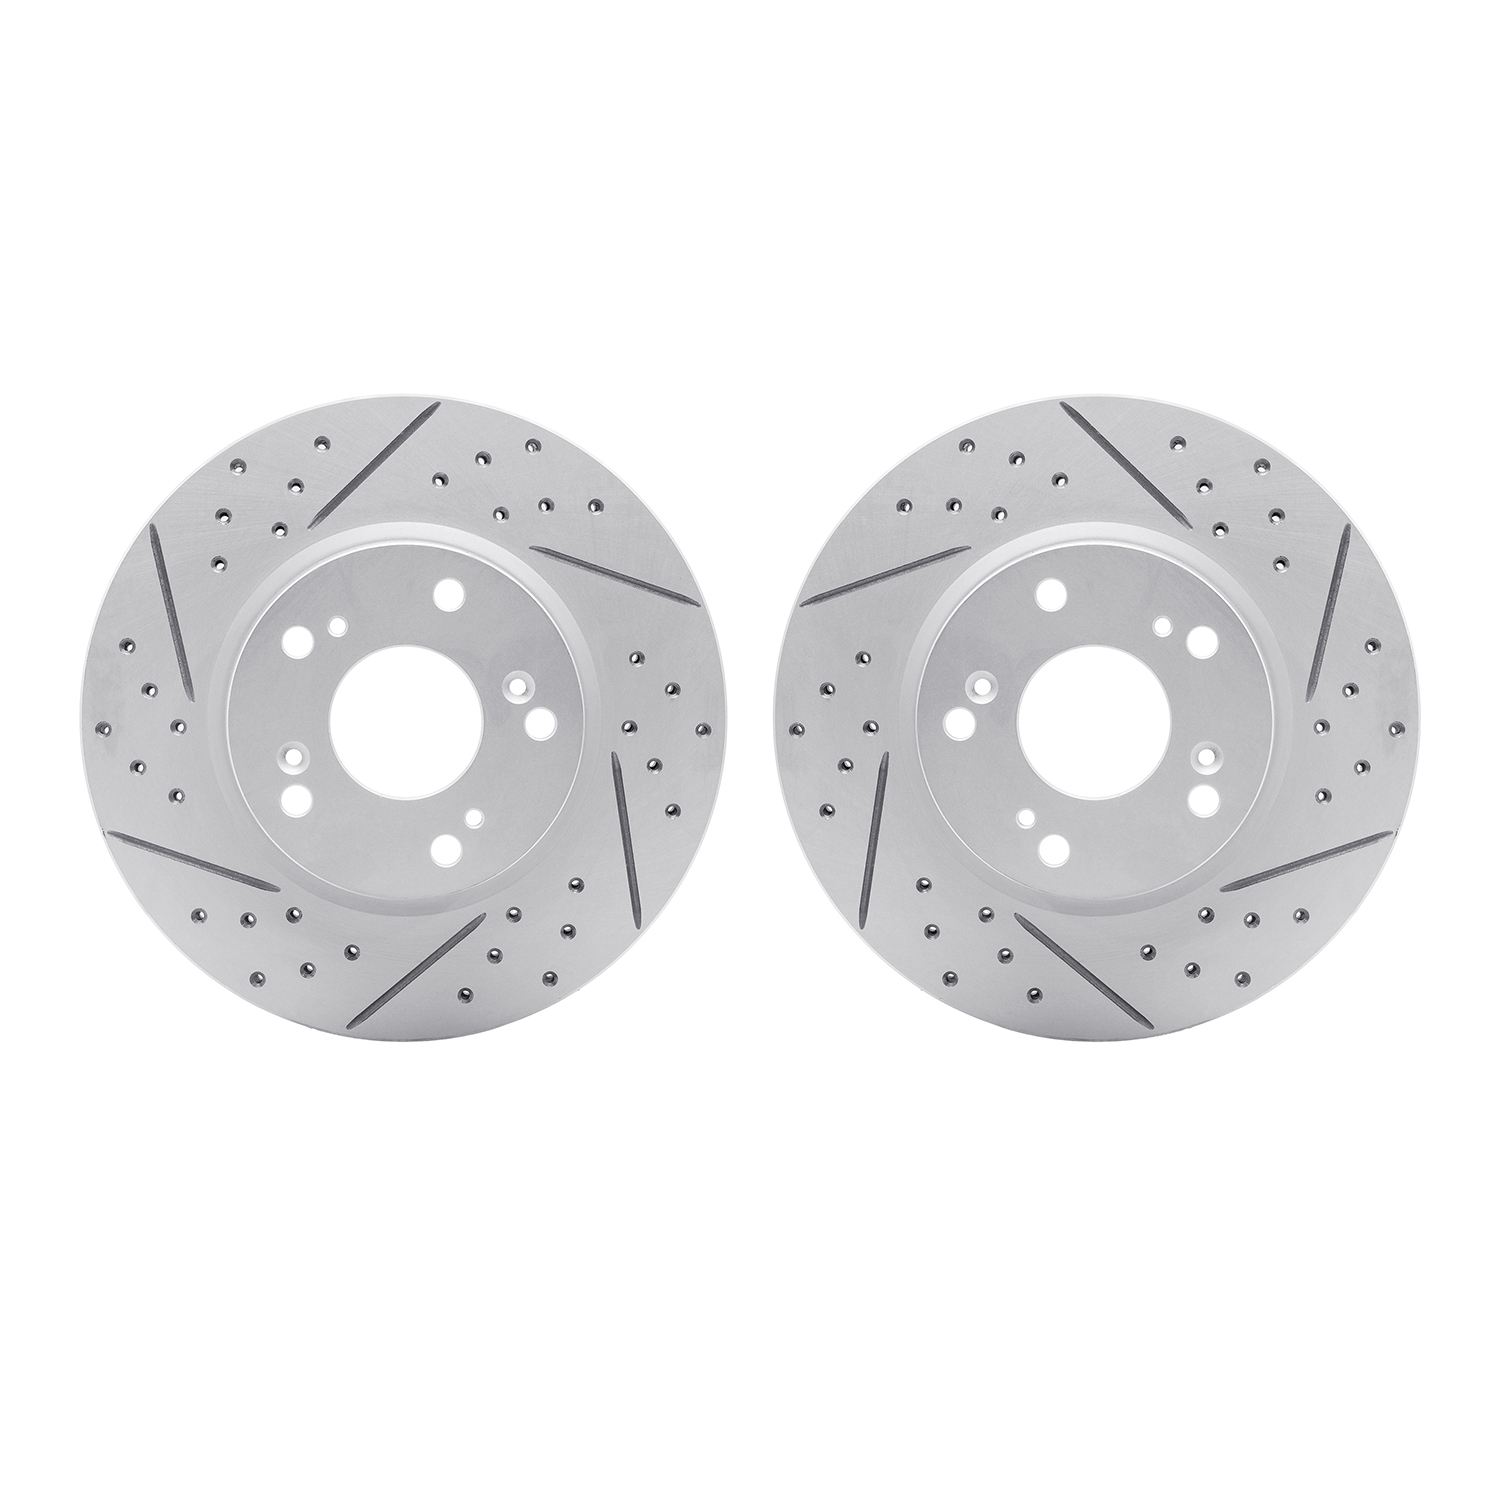 2002-59007 Geoperformance Drilled/Slotted Brake Rotors, 2003-2017 Acura/Honda, Position: Front